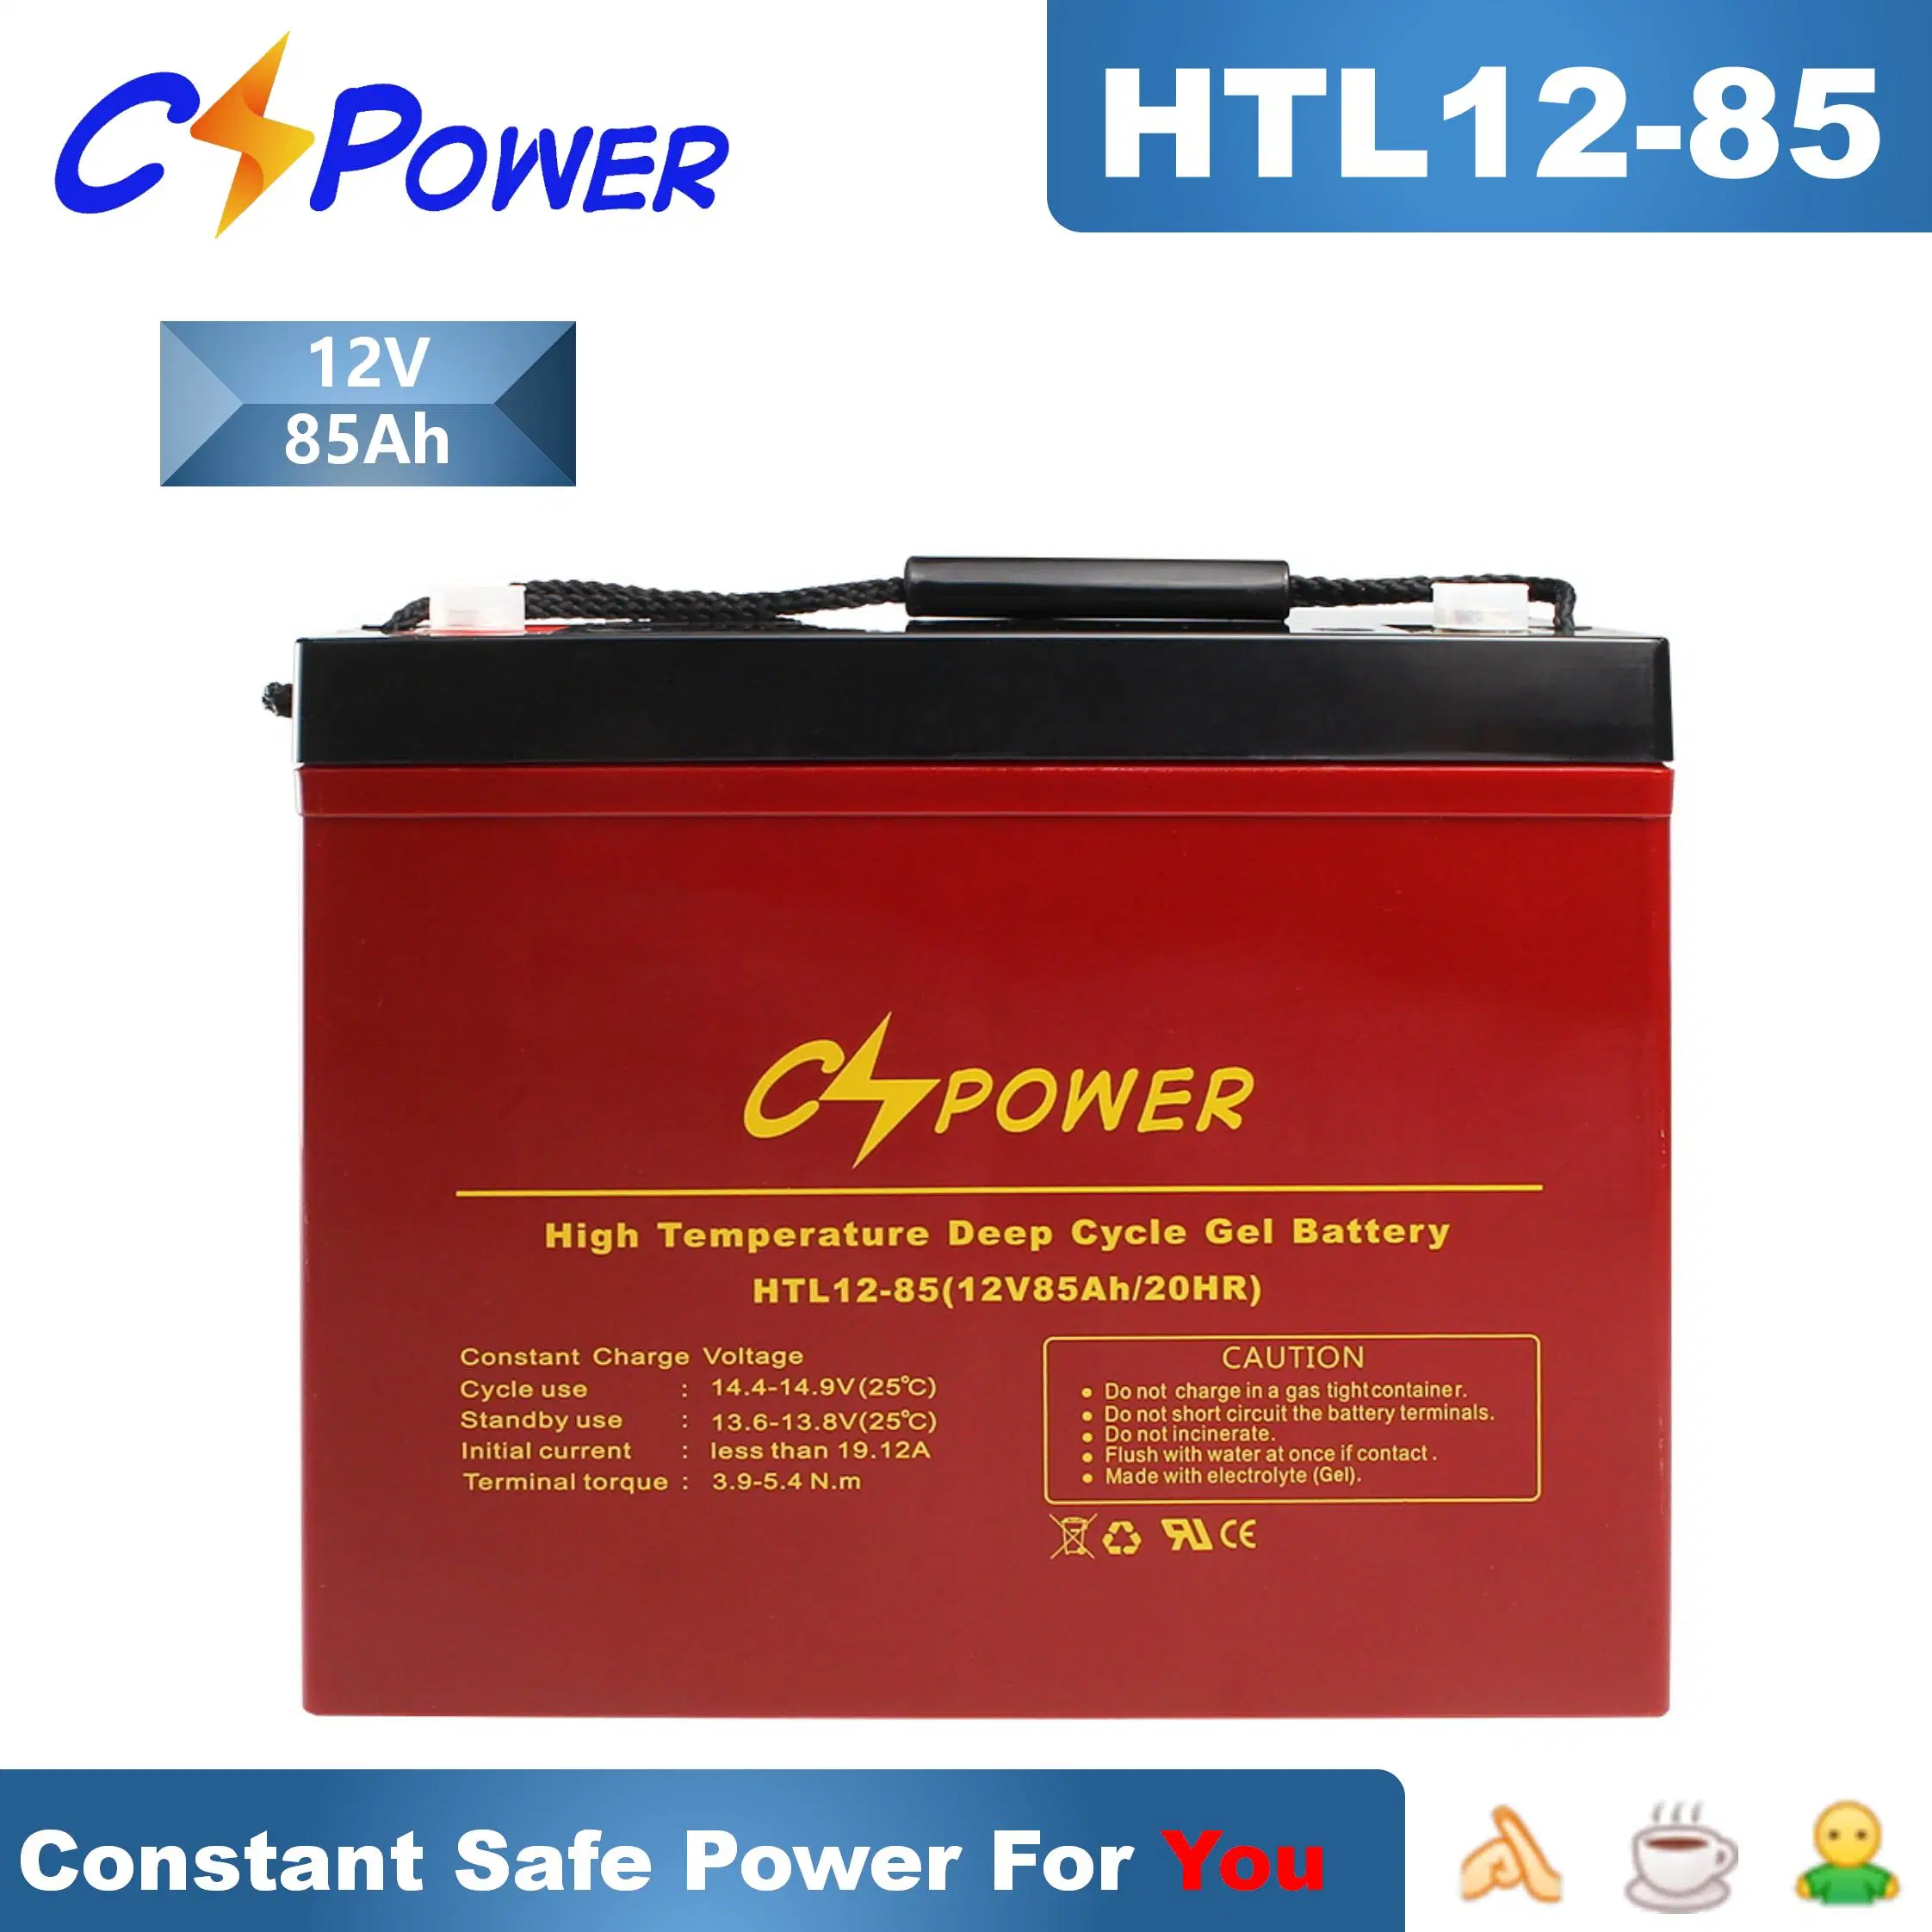 Cspower 12V26ah VRLA Storage Deep Cycle Gel Battery Charger Alarm-Security-Backup-Emergency